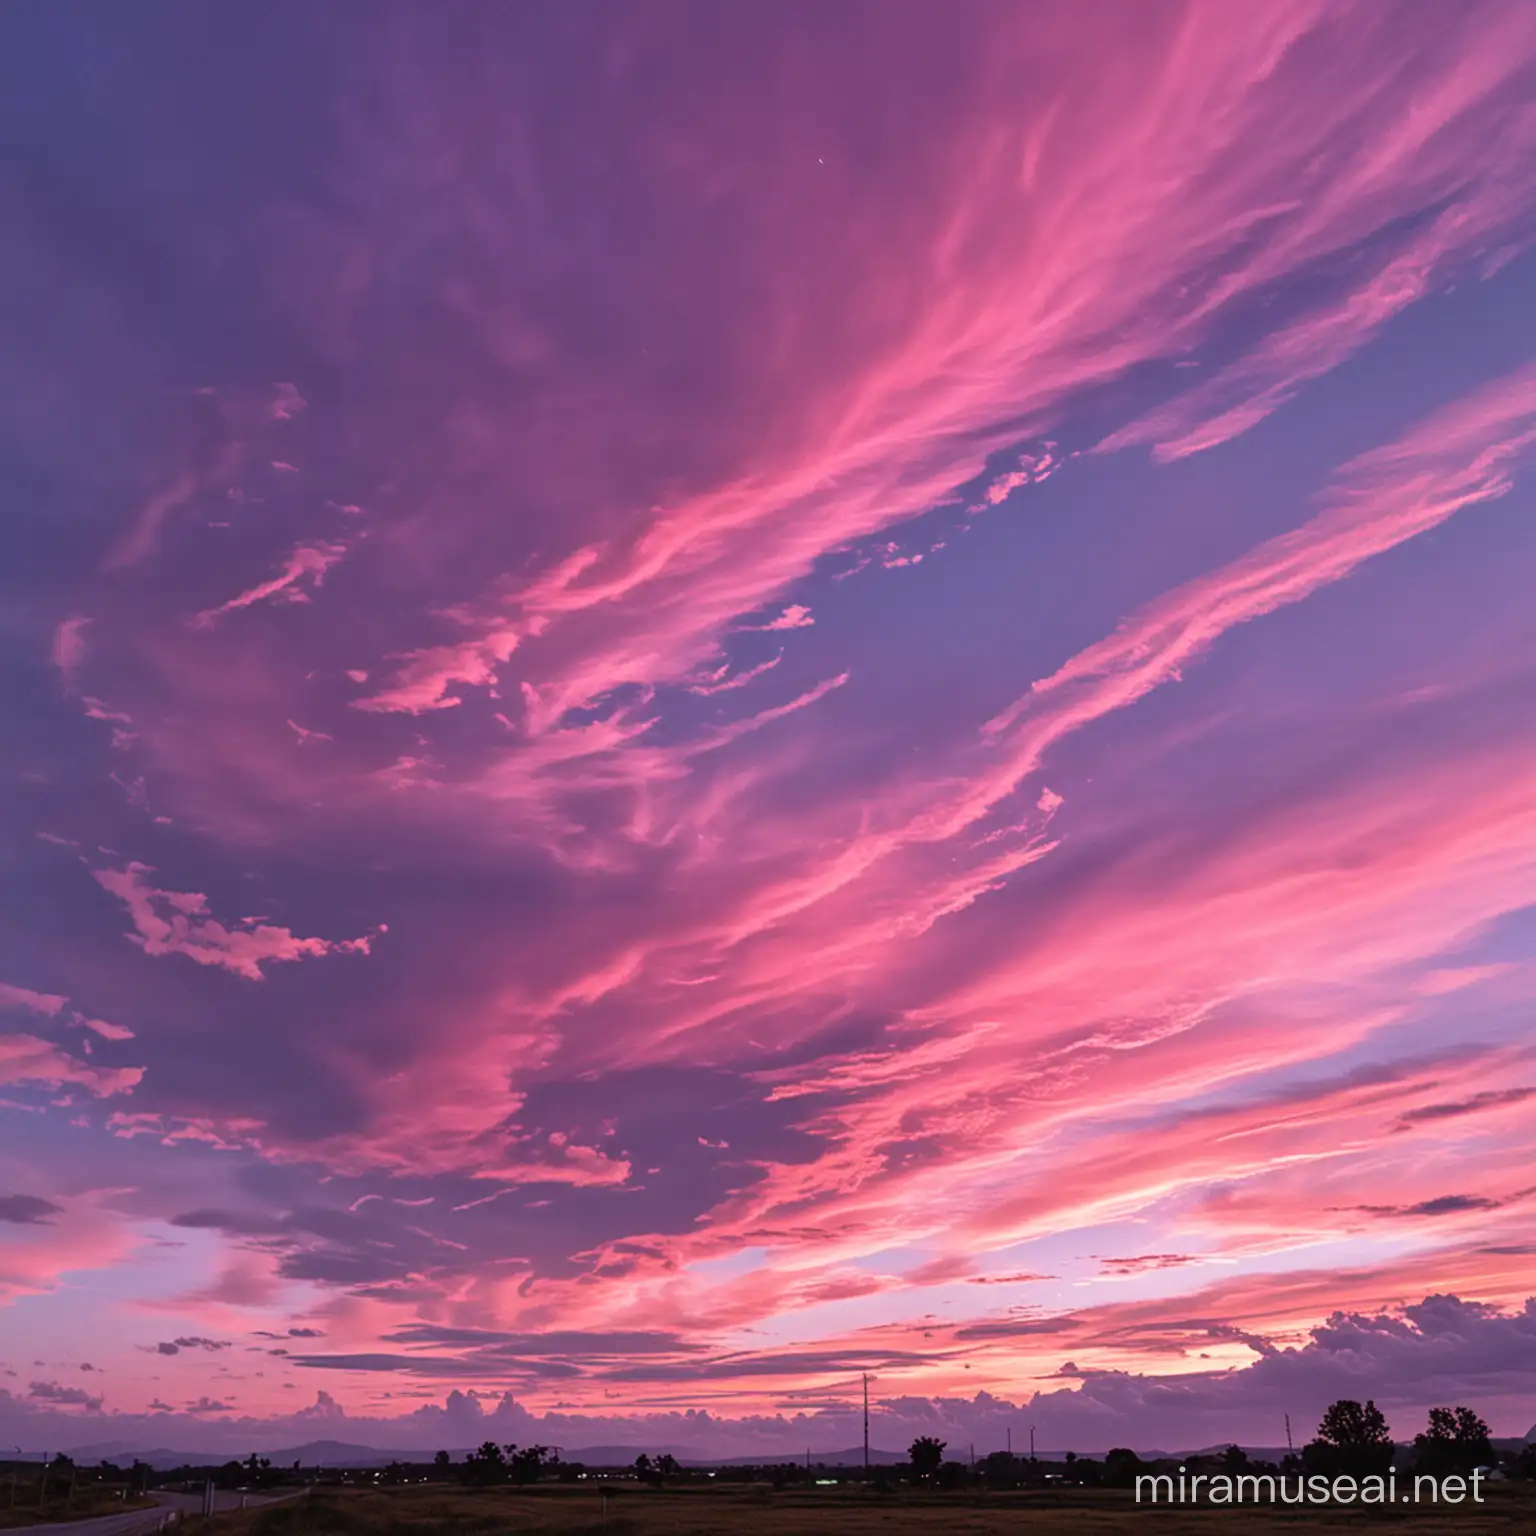 Pink and purple clouds covering the sky from afar